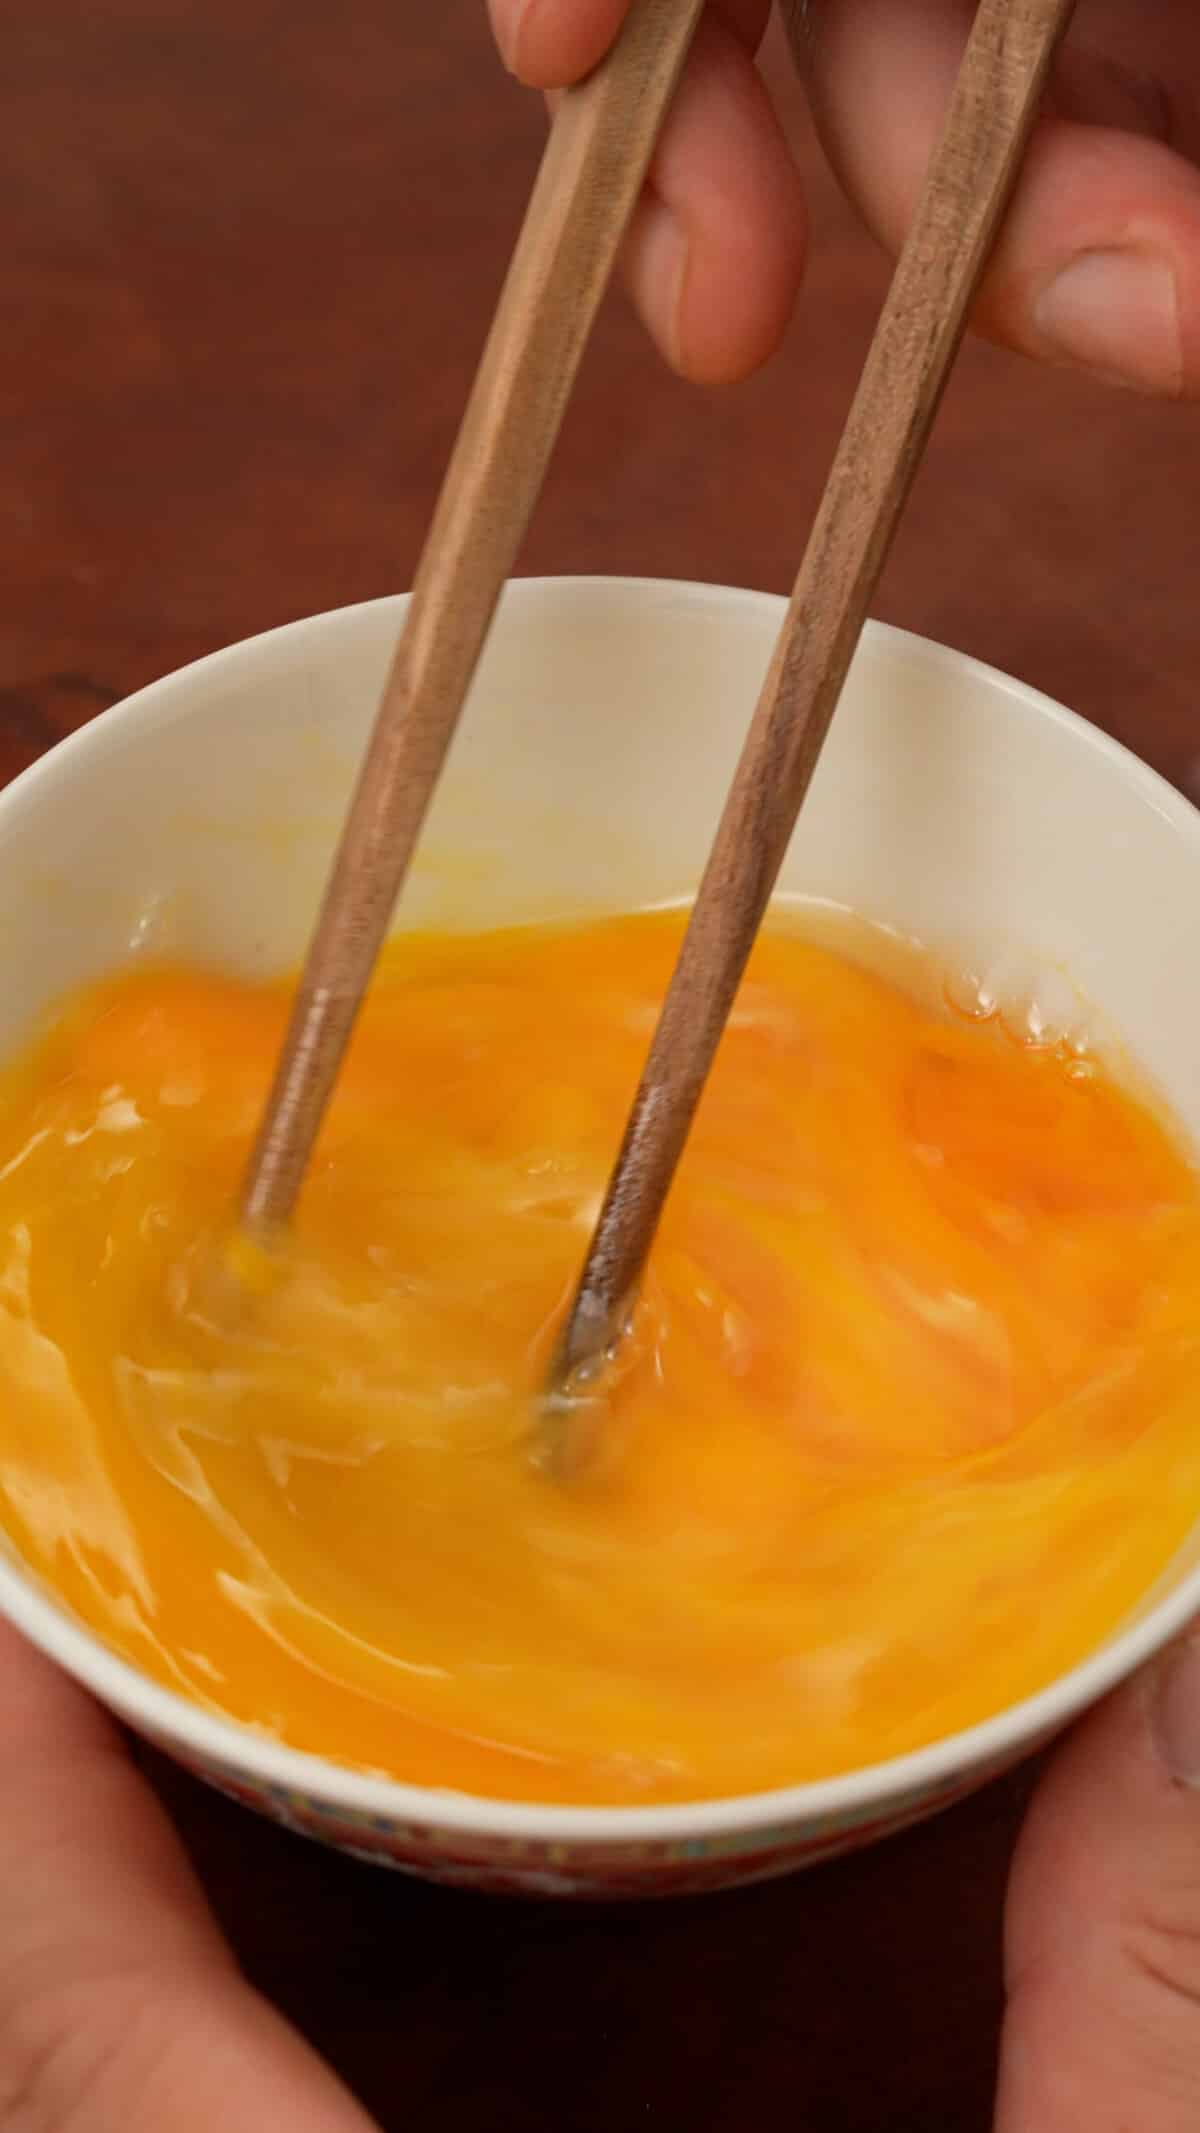 Beating eggs in a bowl with chopsticks.